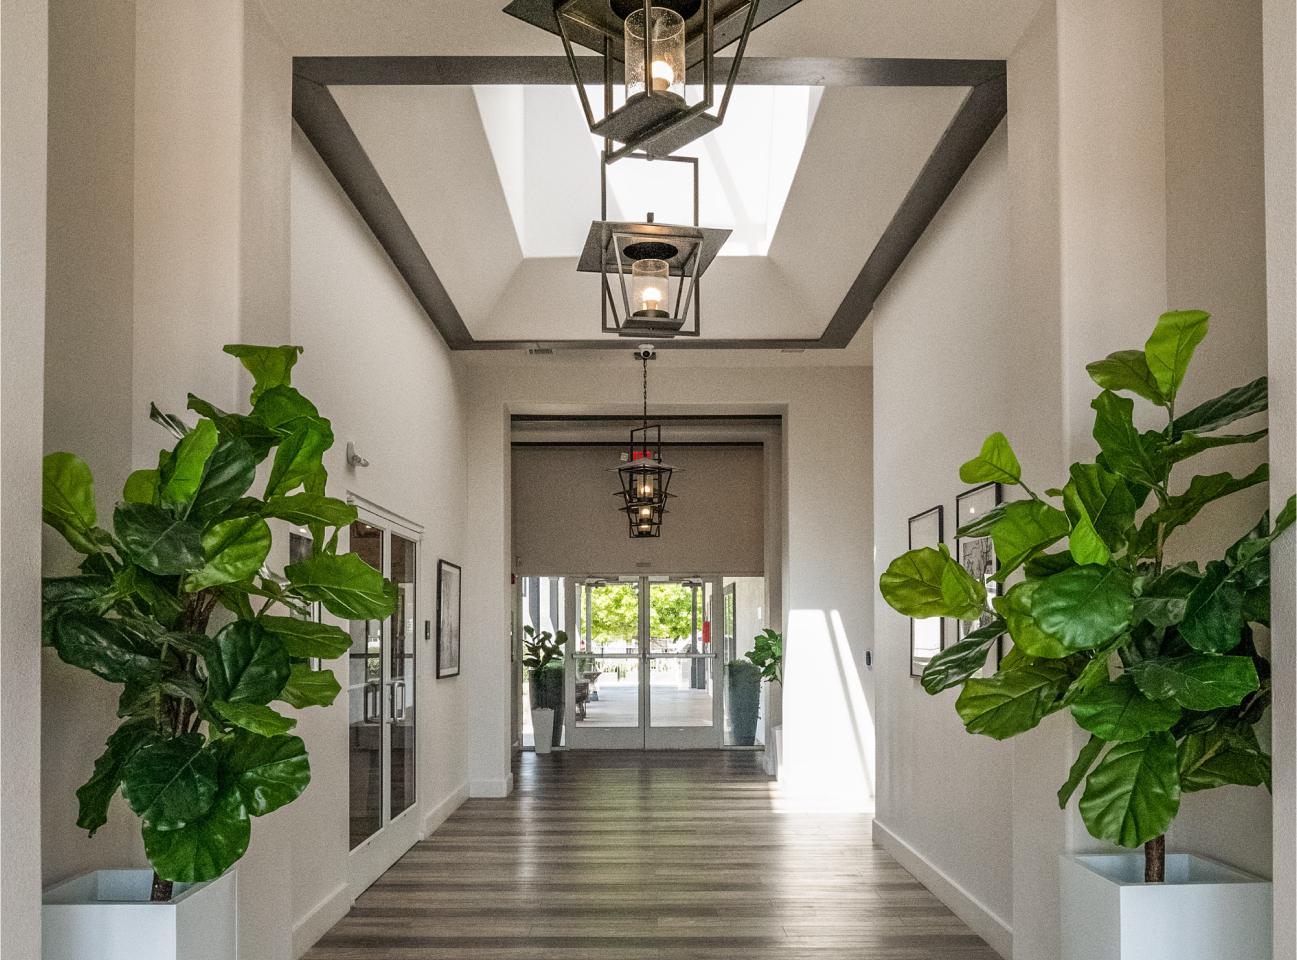 Looking down the main hallway of an apartment building with pendant lights hanging from the ceilling and plants lining the walls.